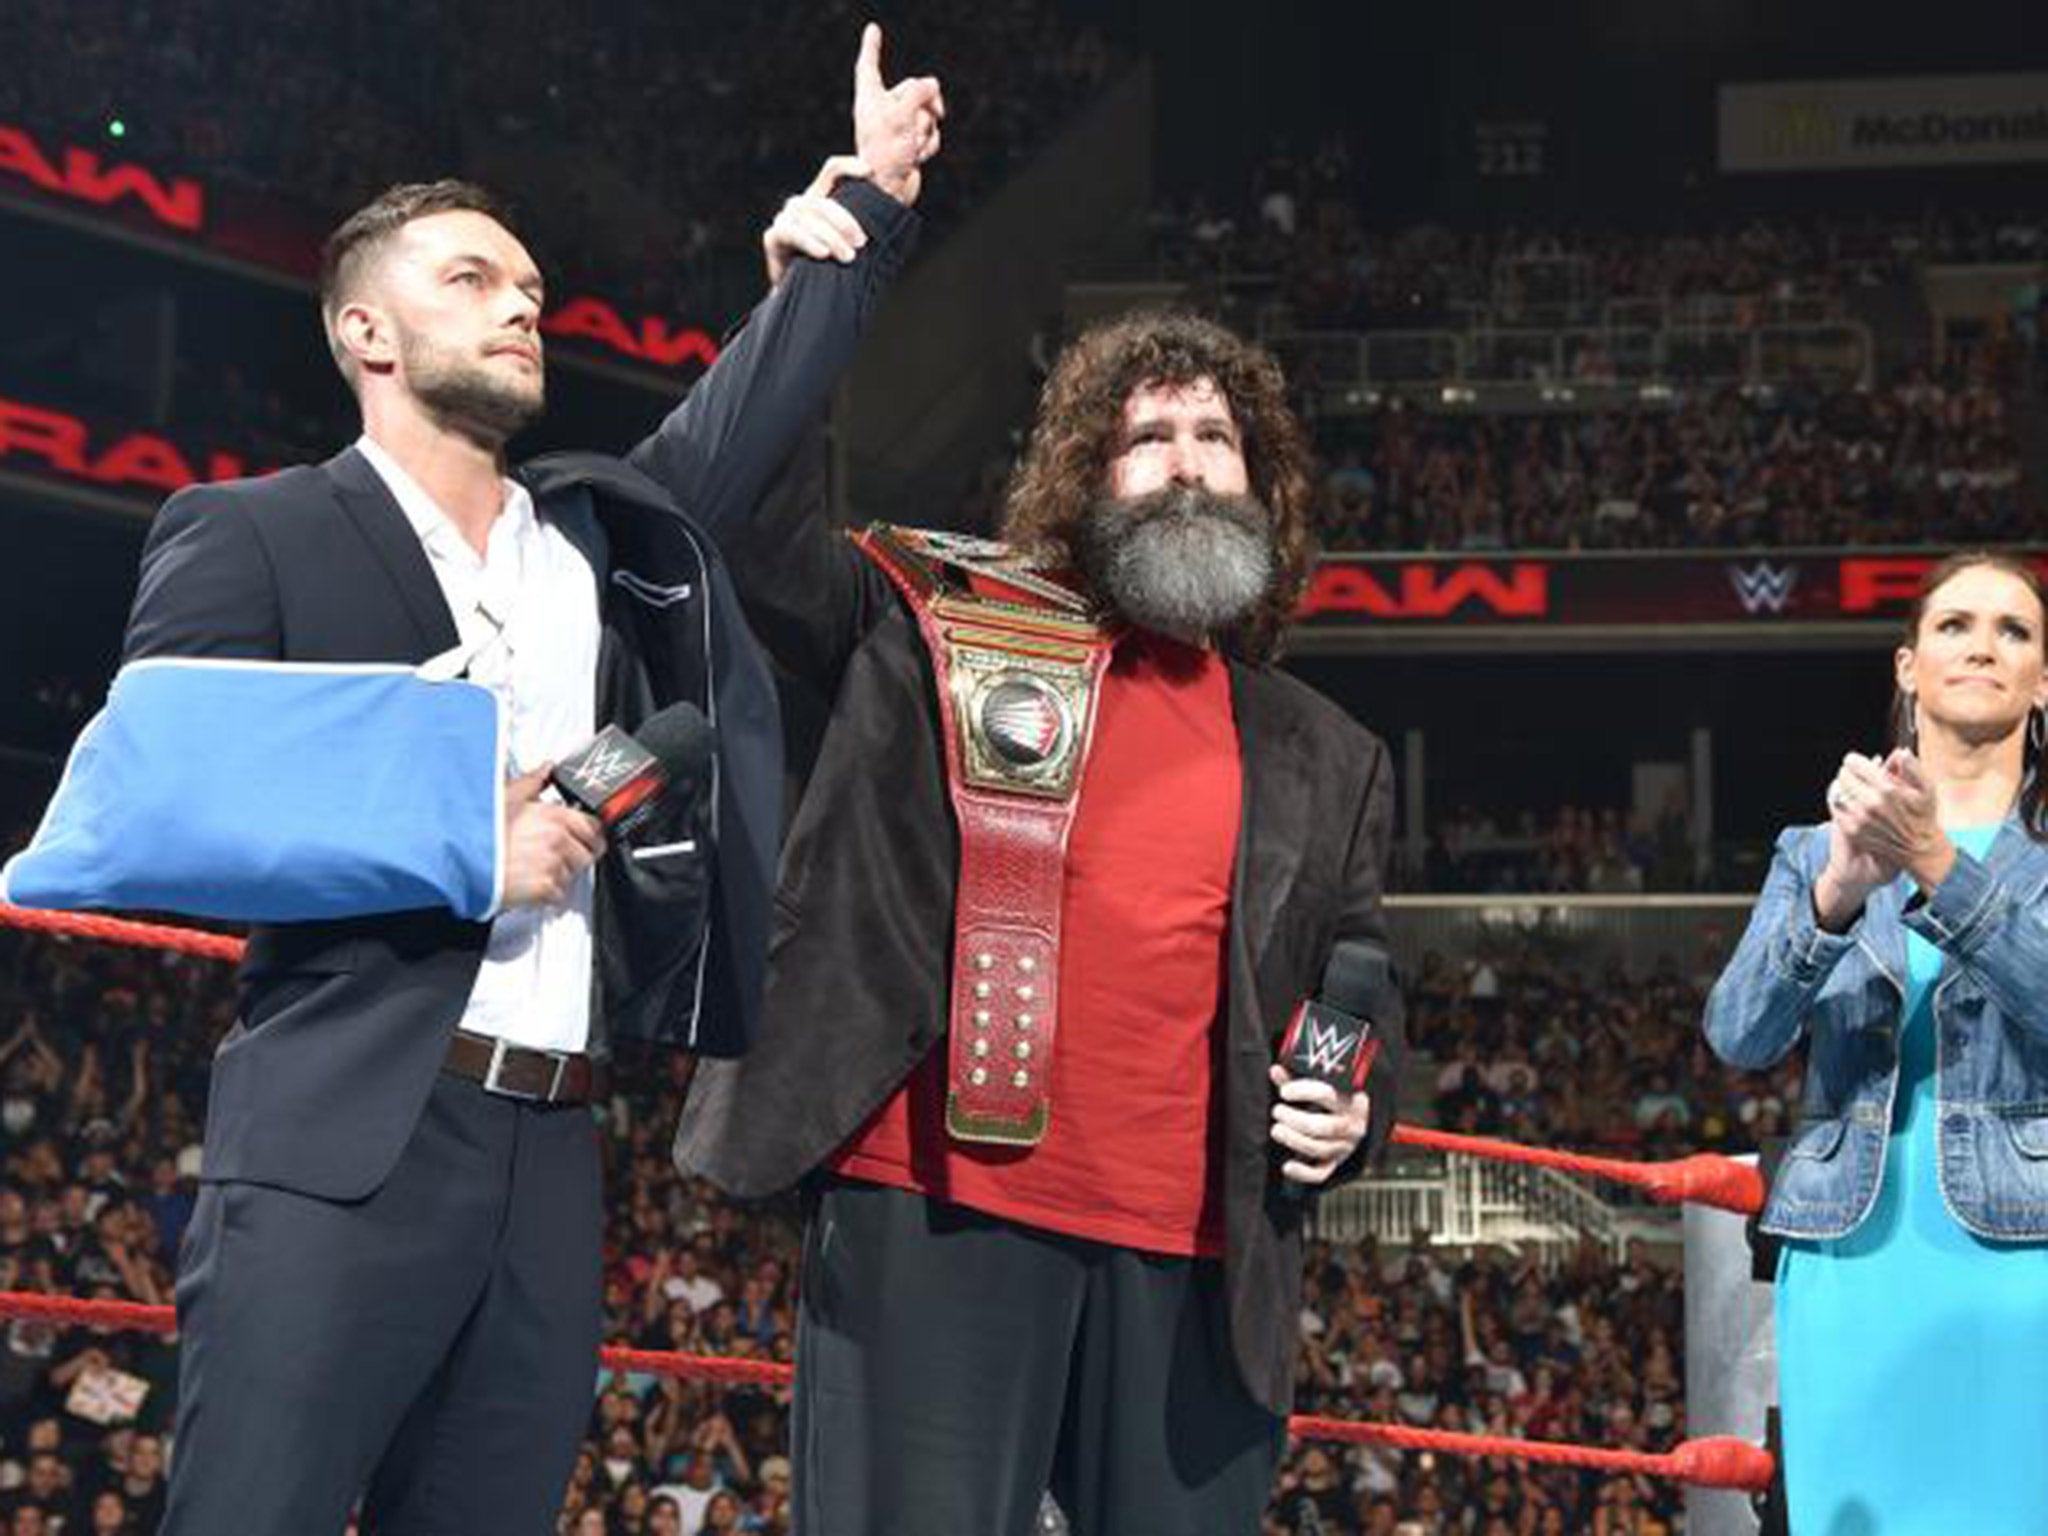 Finn Balor relinquishes his WWE Universal Championship to Mick Foley and Stephanie McMahon